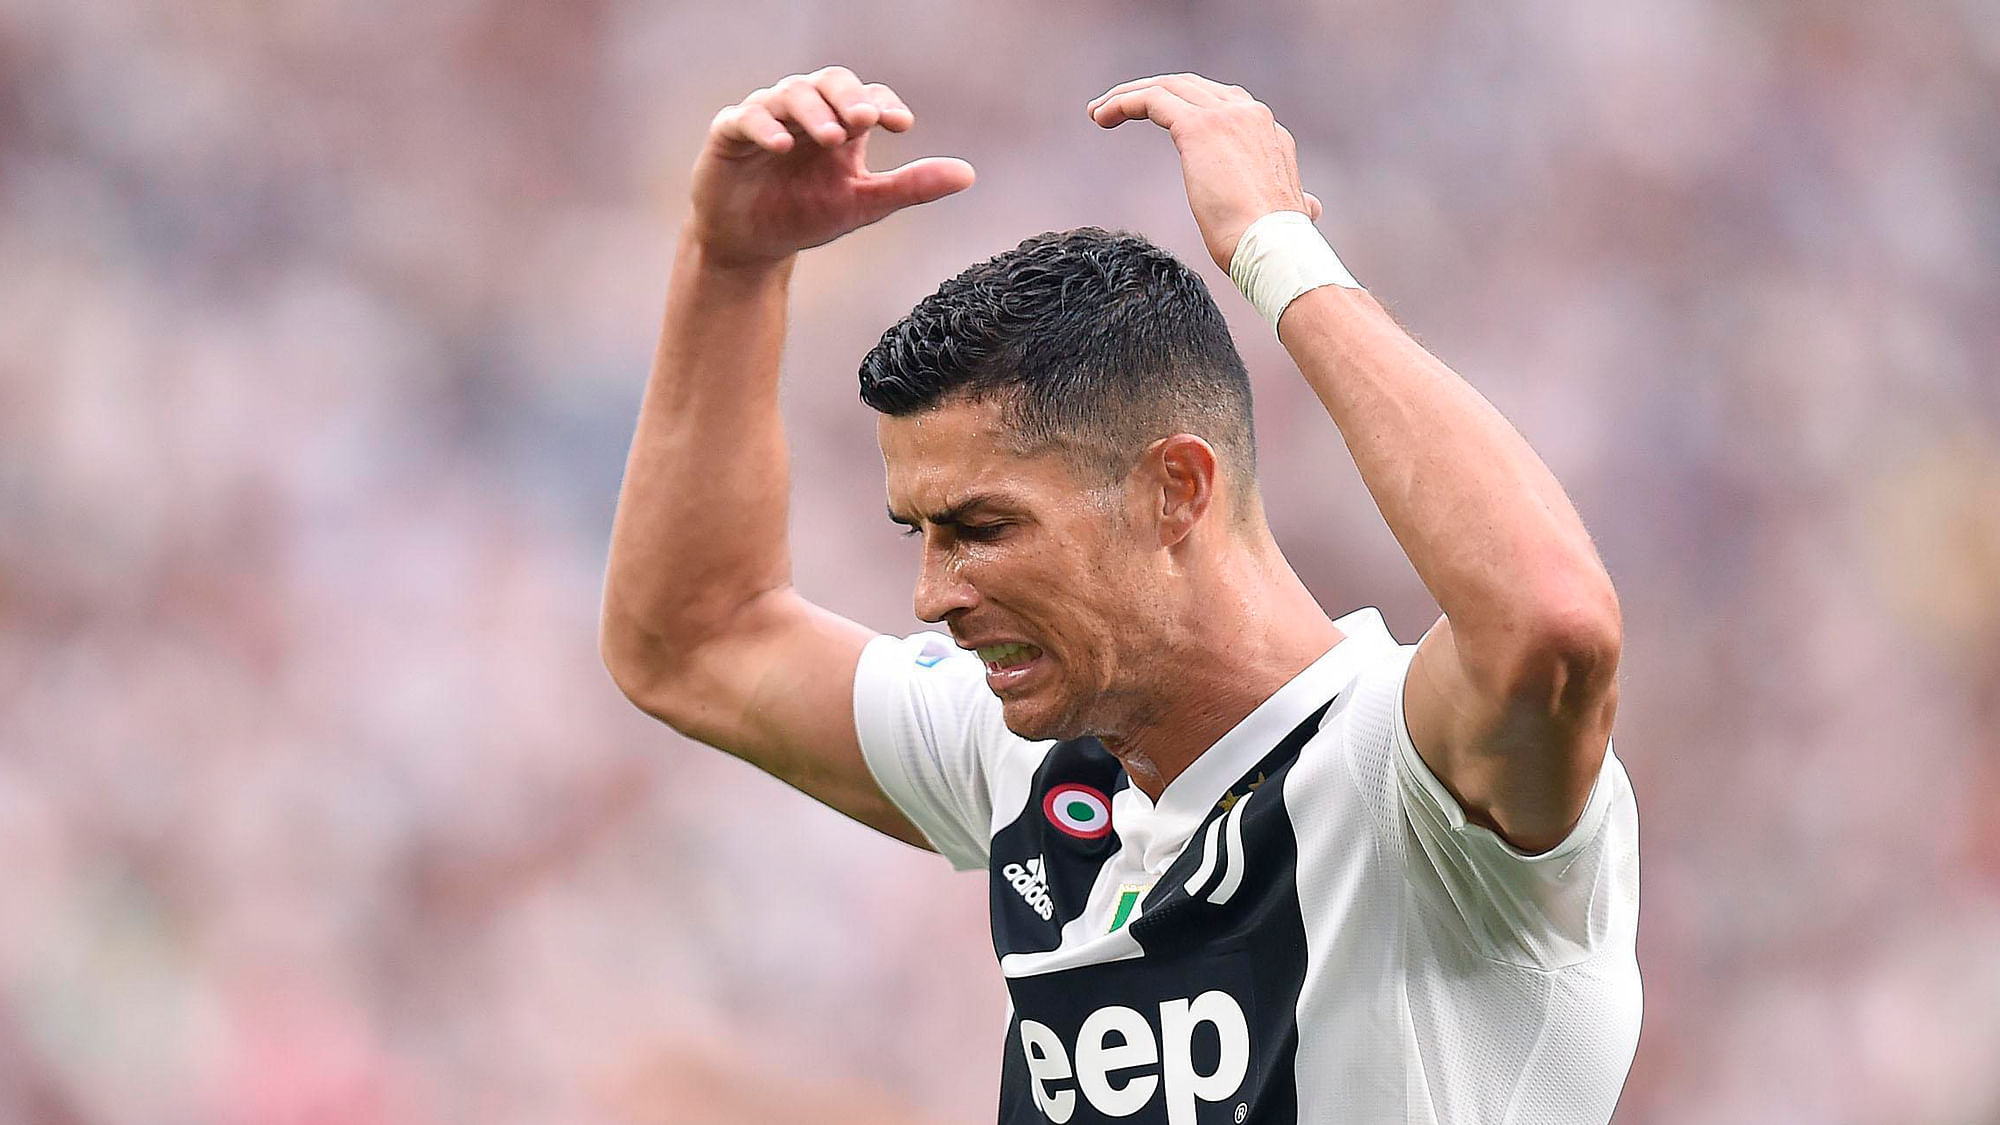 Cristiano Ronaldo has been accused of rape by a&nbsp;Nevada woman.